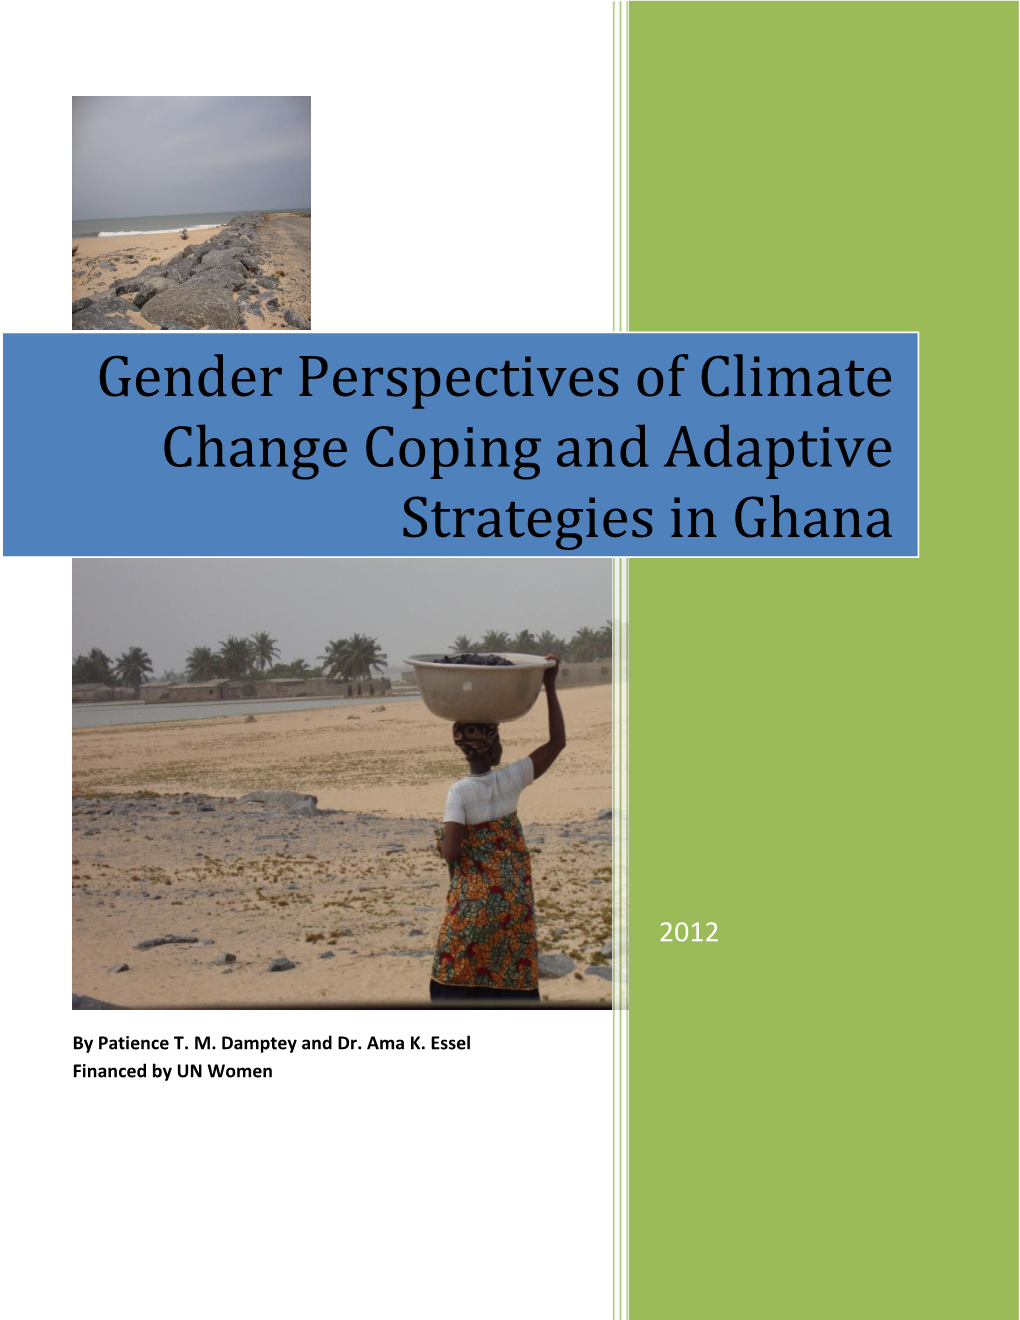 Gender Perspectives of Climate Change Coping and Adaptive Strategies in Ghana